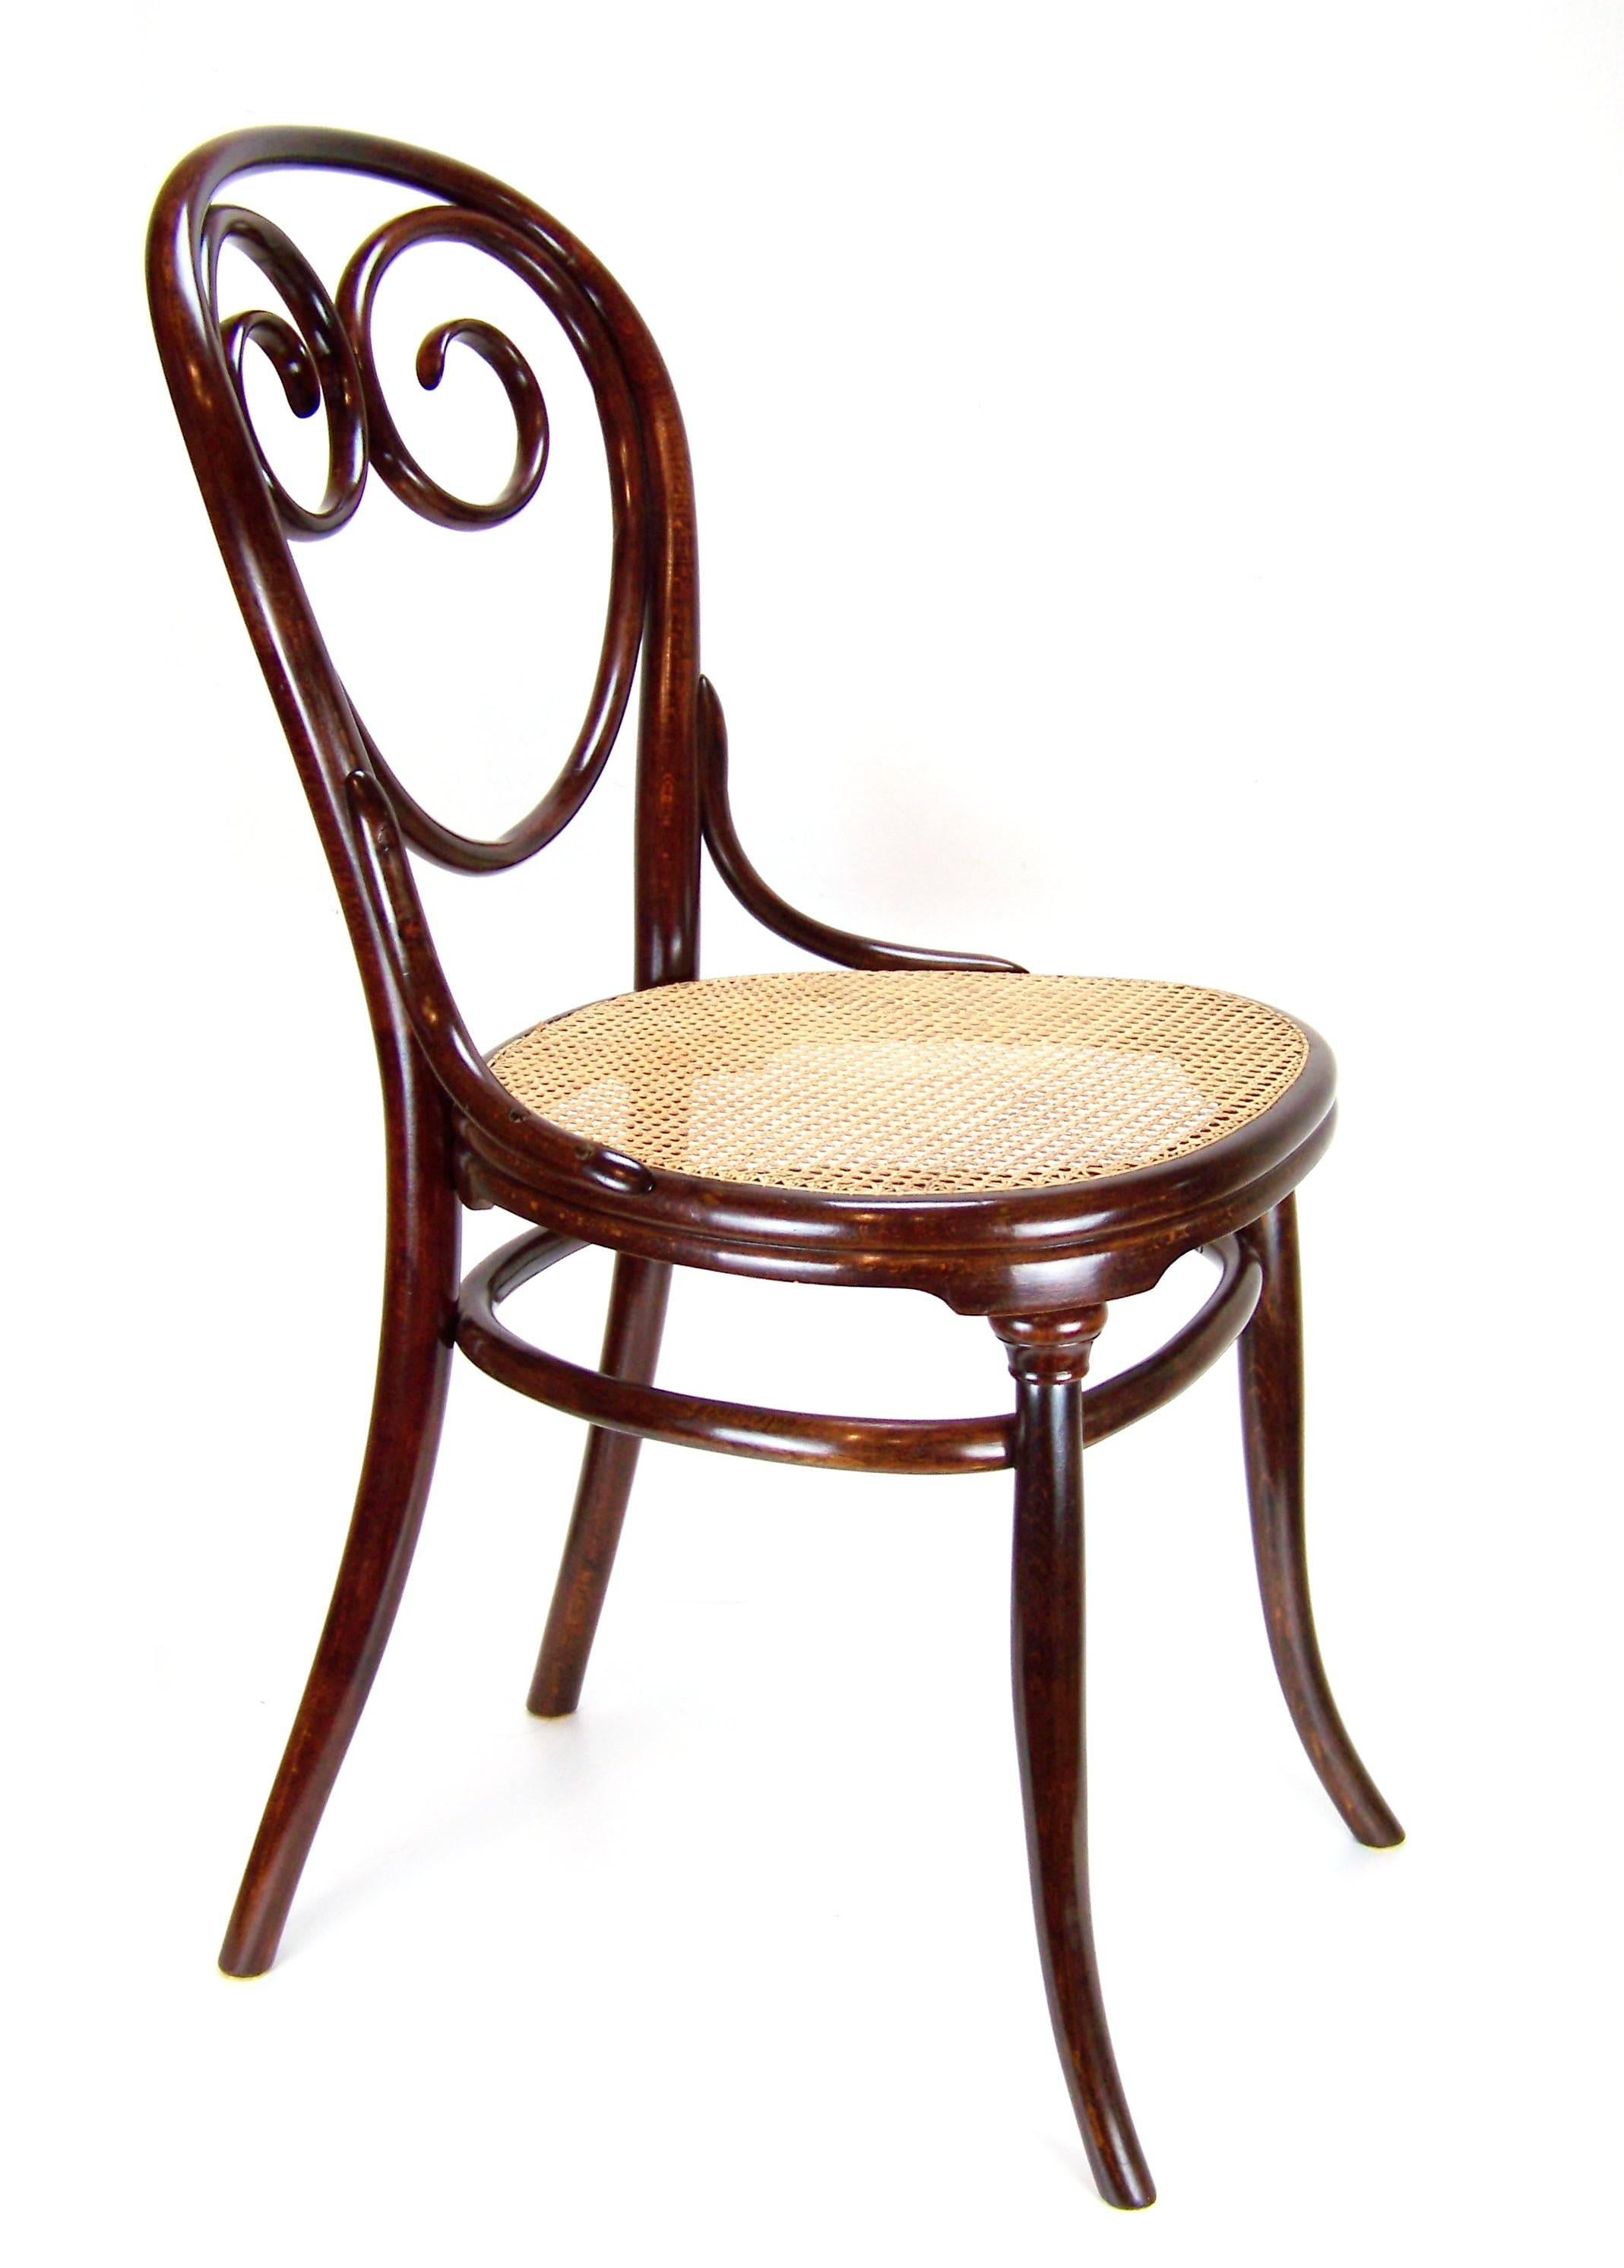 Manufactured in Austria by the Gebrüder Thonet company. In the production program was included around the year 1850. It's very early model. Marked with paper label and stamp, which is used around year 1870. Newly restored.